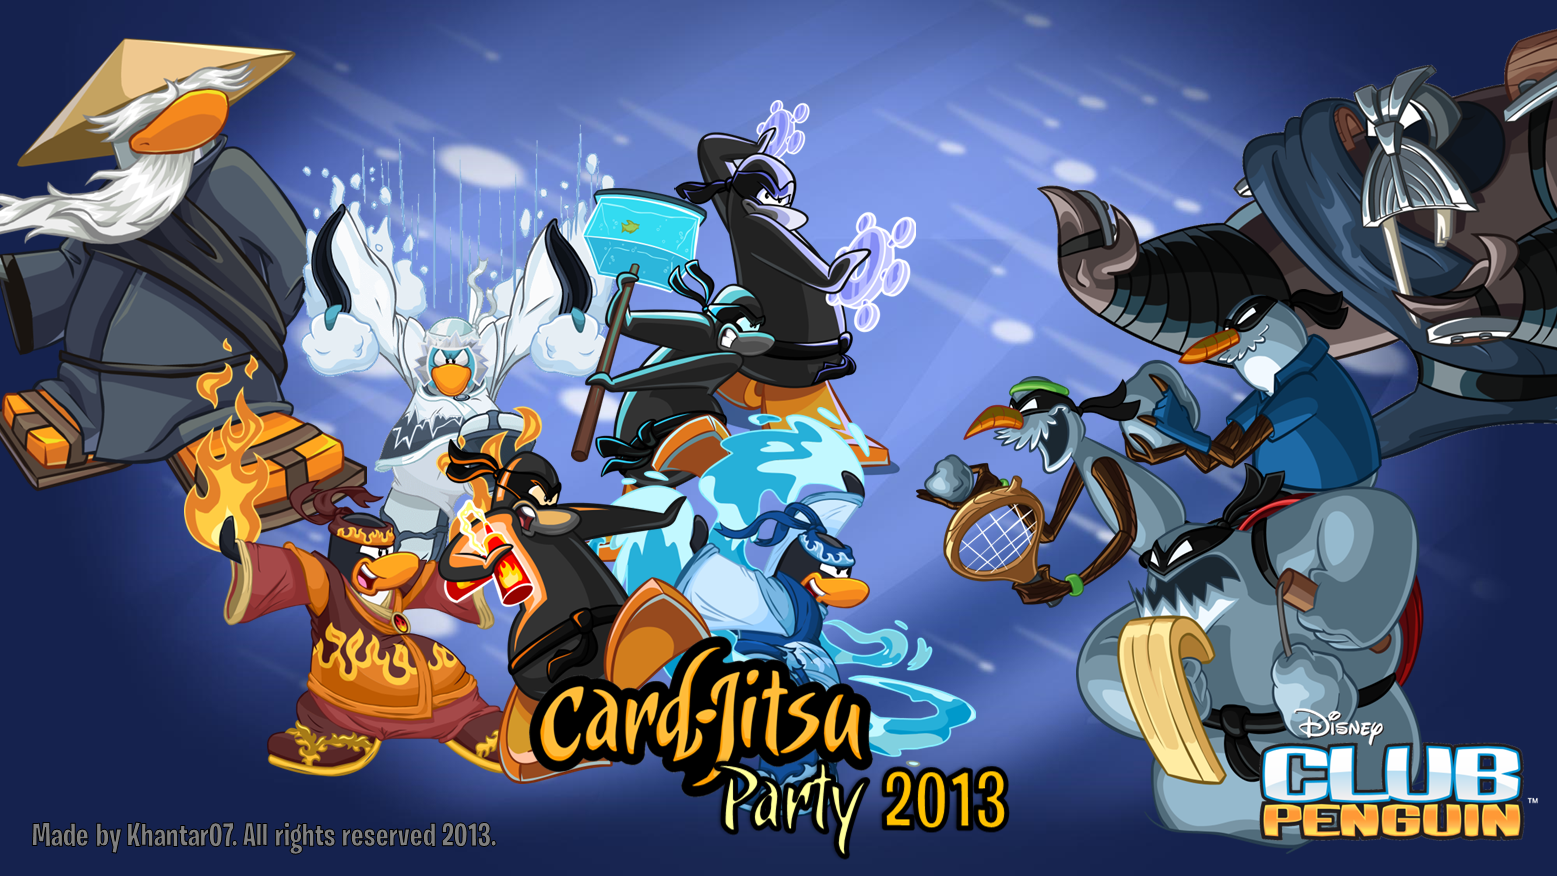 Free download Image Club Penguin Card Jitsu Party 2013 Wallpaper made by  Khantar07 [1557x876] for your Desktop, Mobile & Tablet | Explore 50+ Club  Penguin Wallpapers for Desktop | Penguin Wallpaper, Club